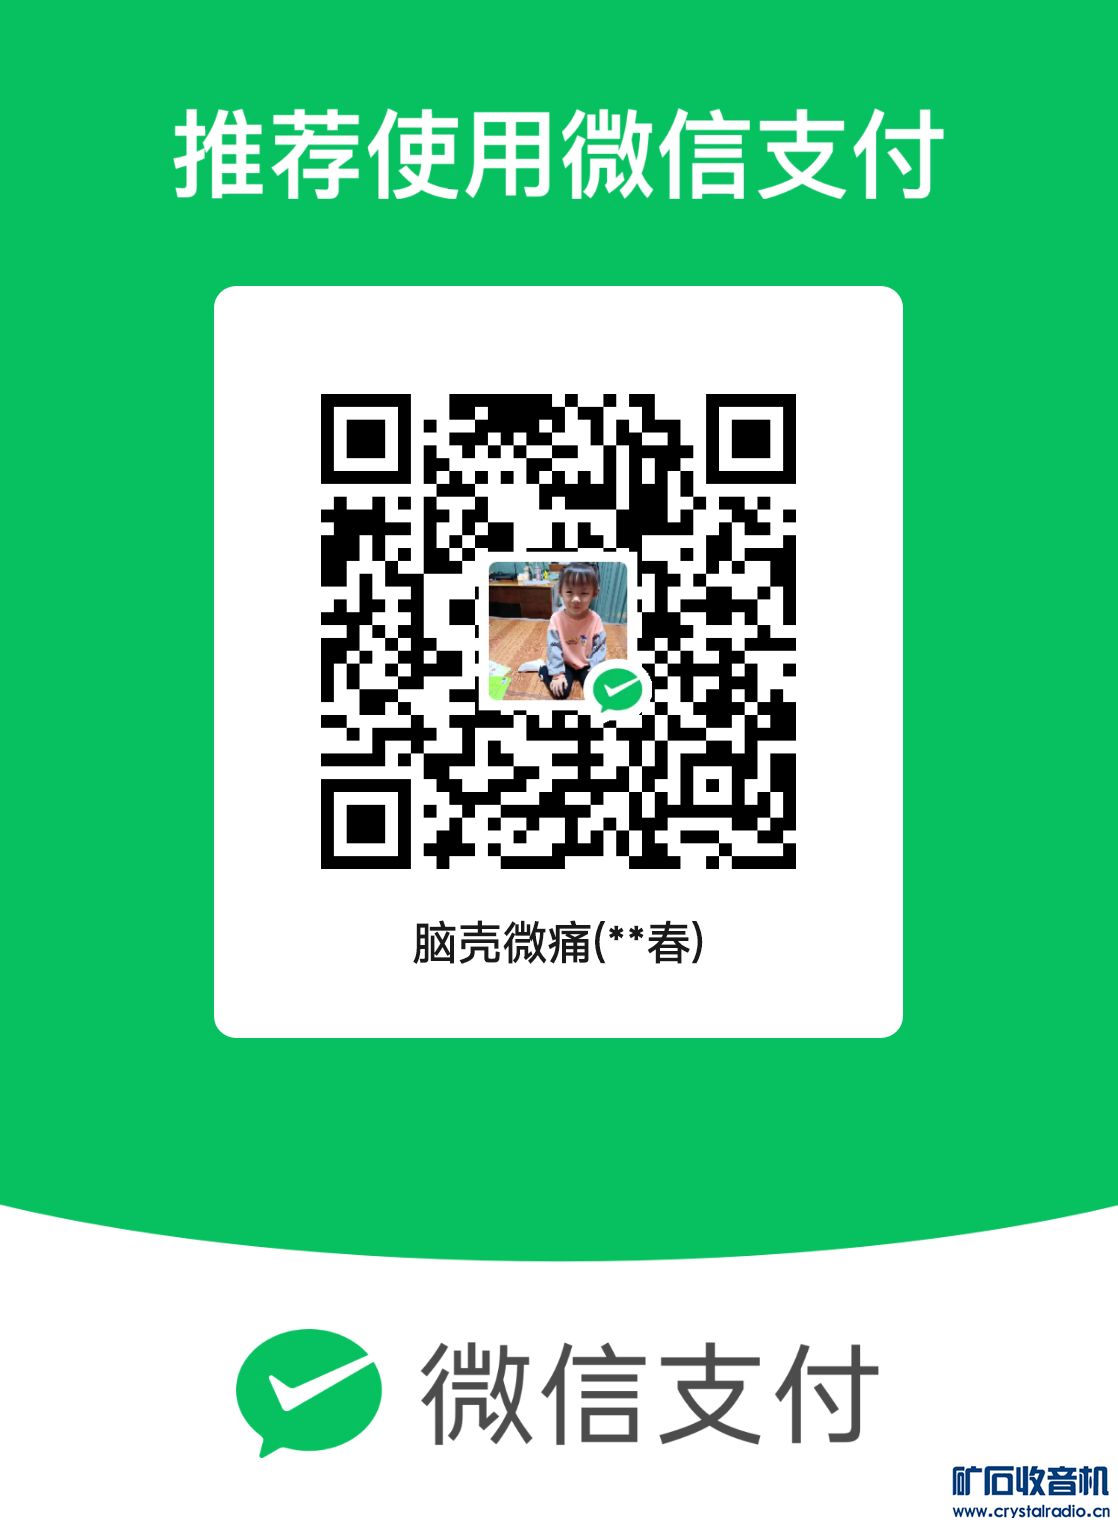 mm_facetoface_collect_qrcode_1700133069496.png